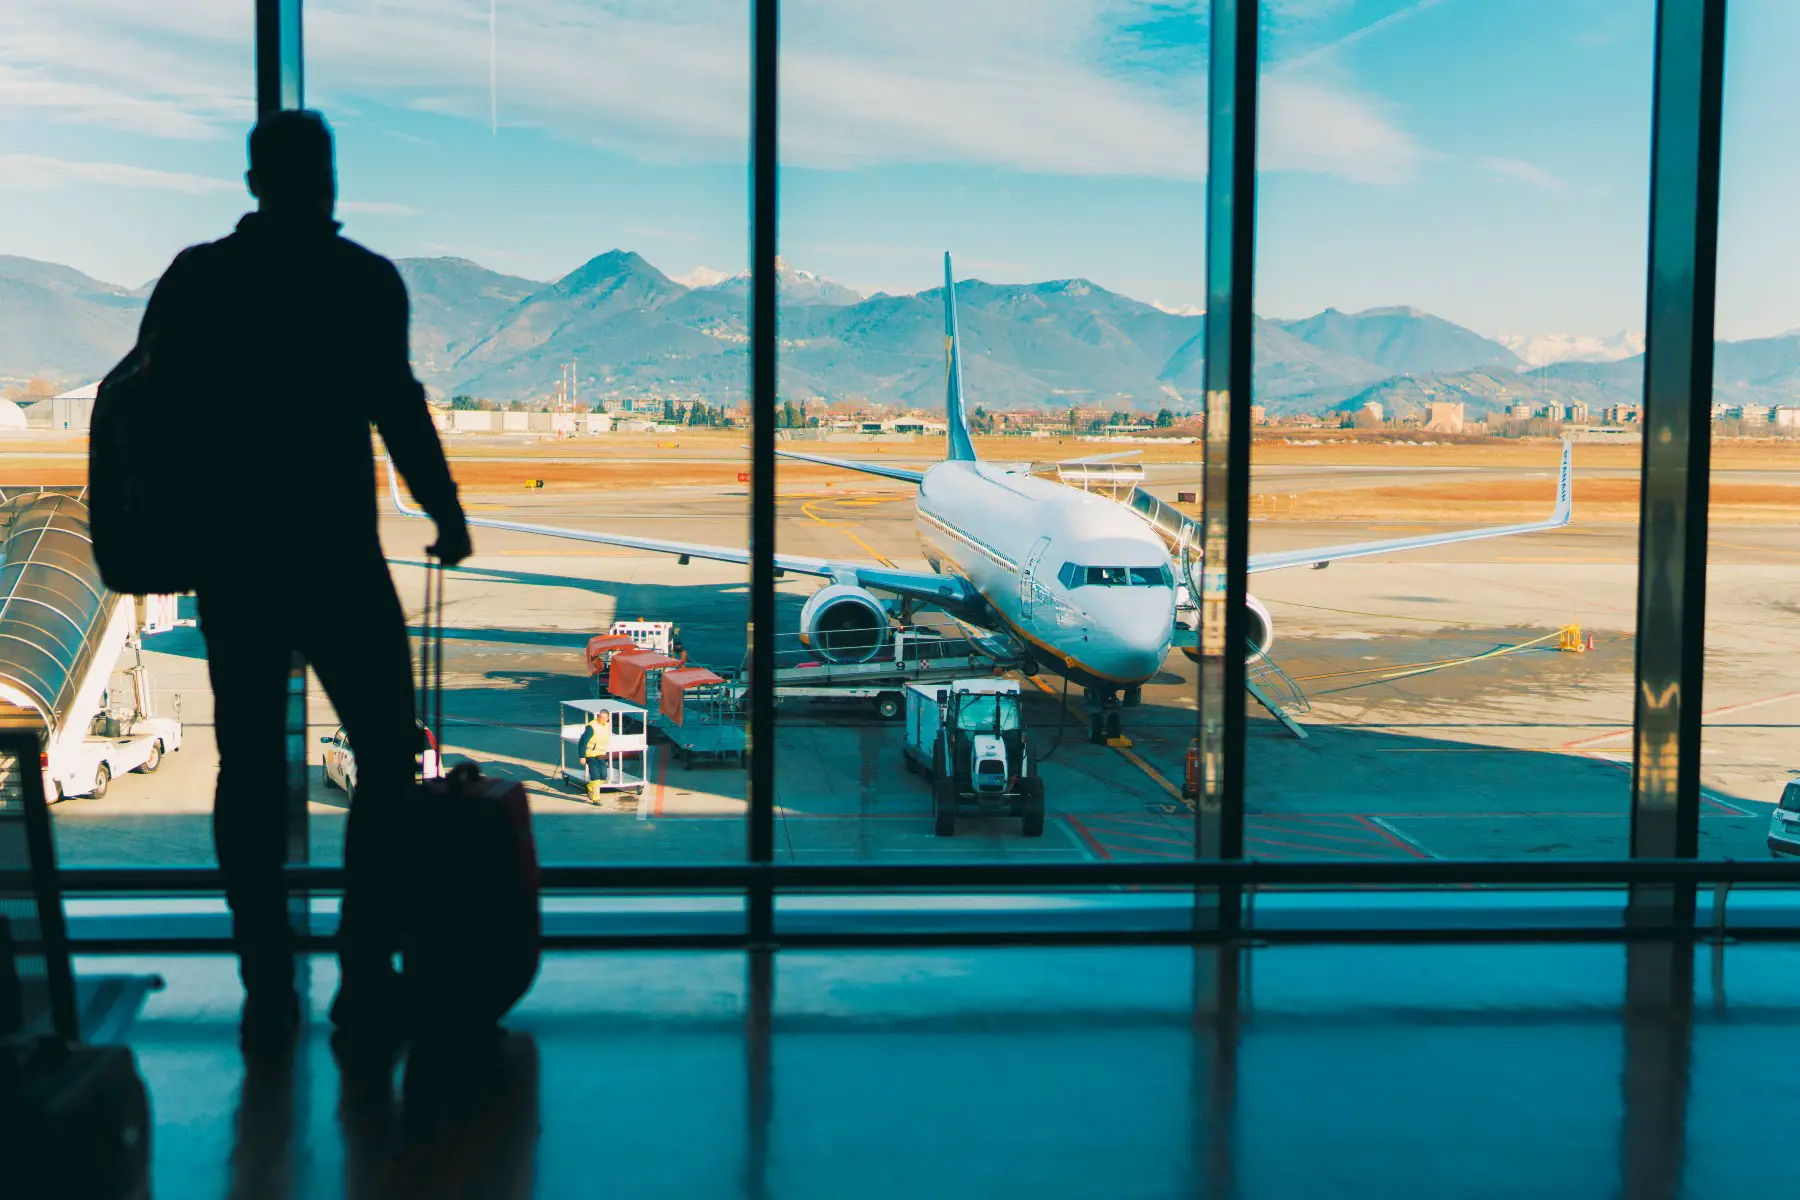 Dark silhouette of a person with a suitcase, looking at the plane outside.